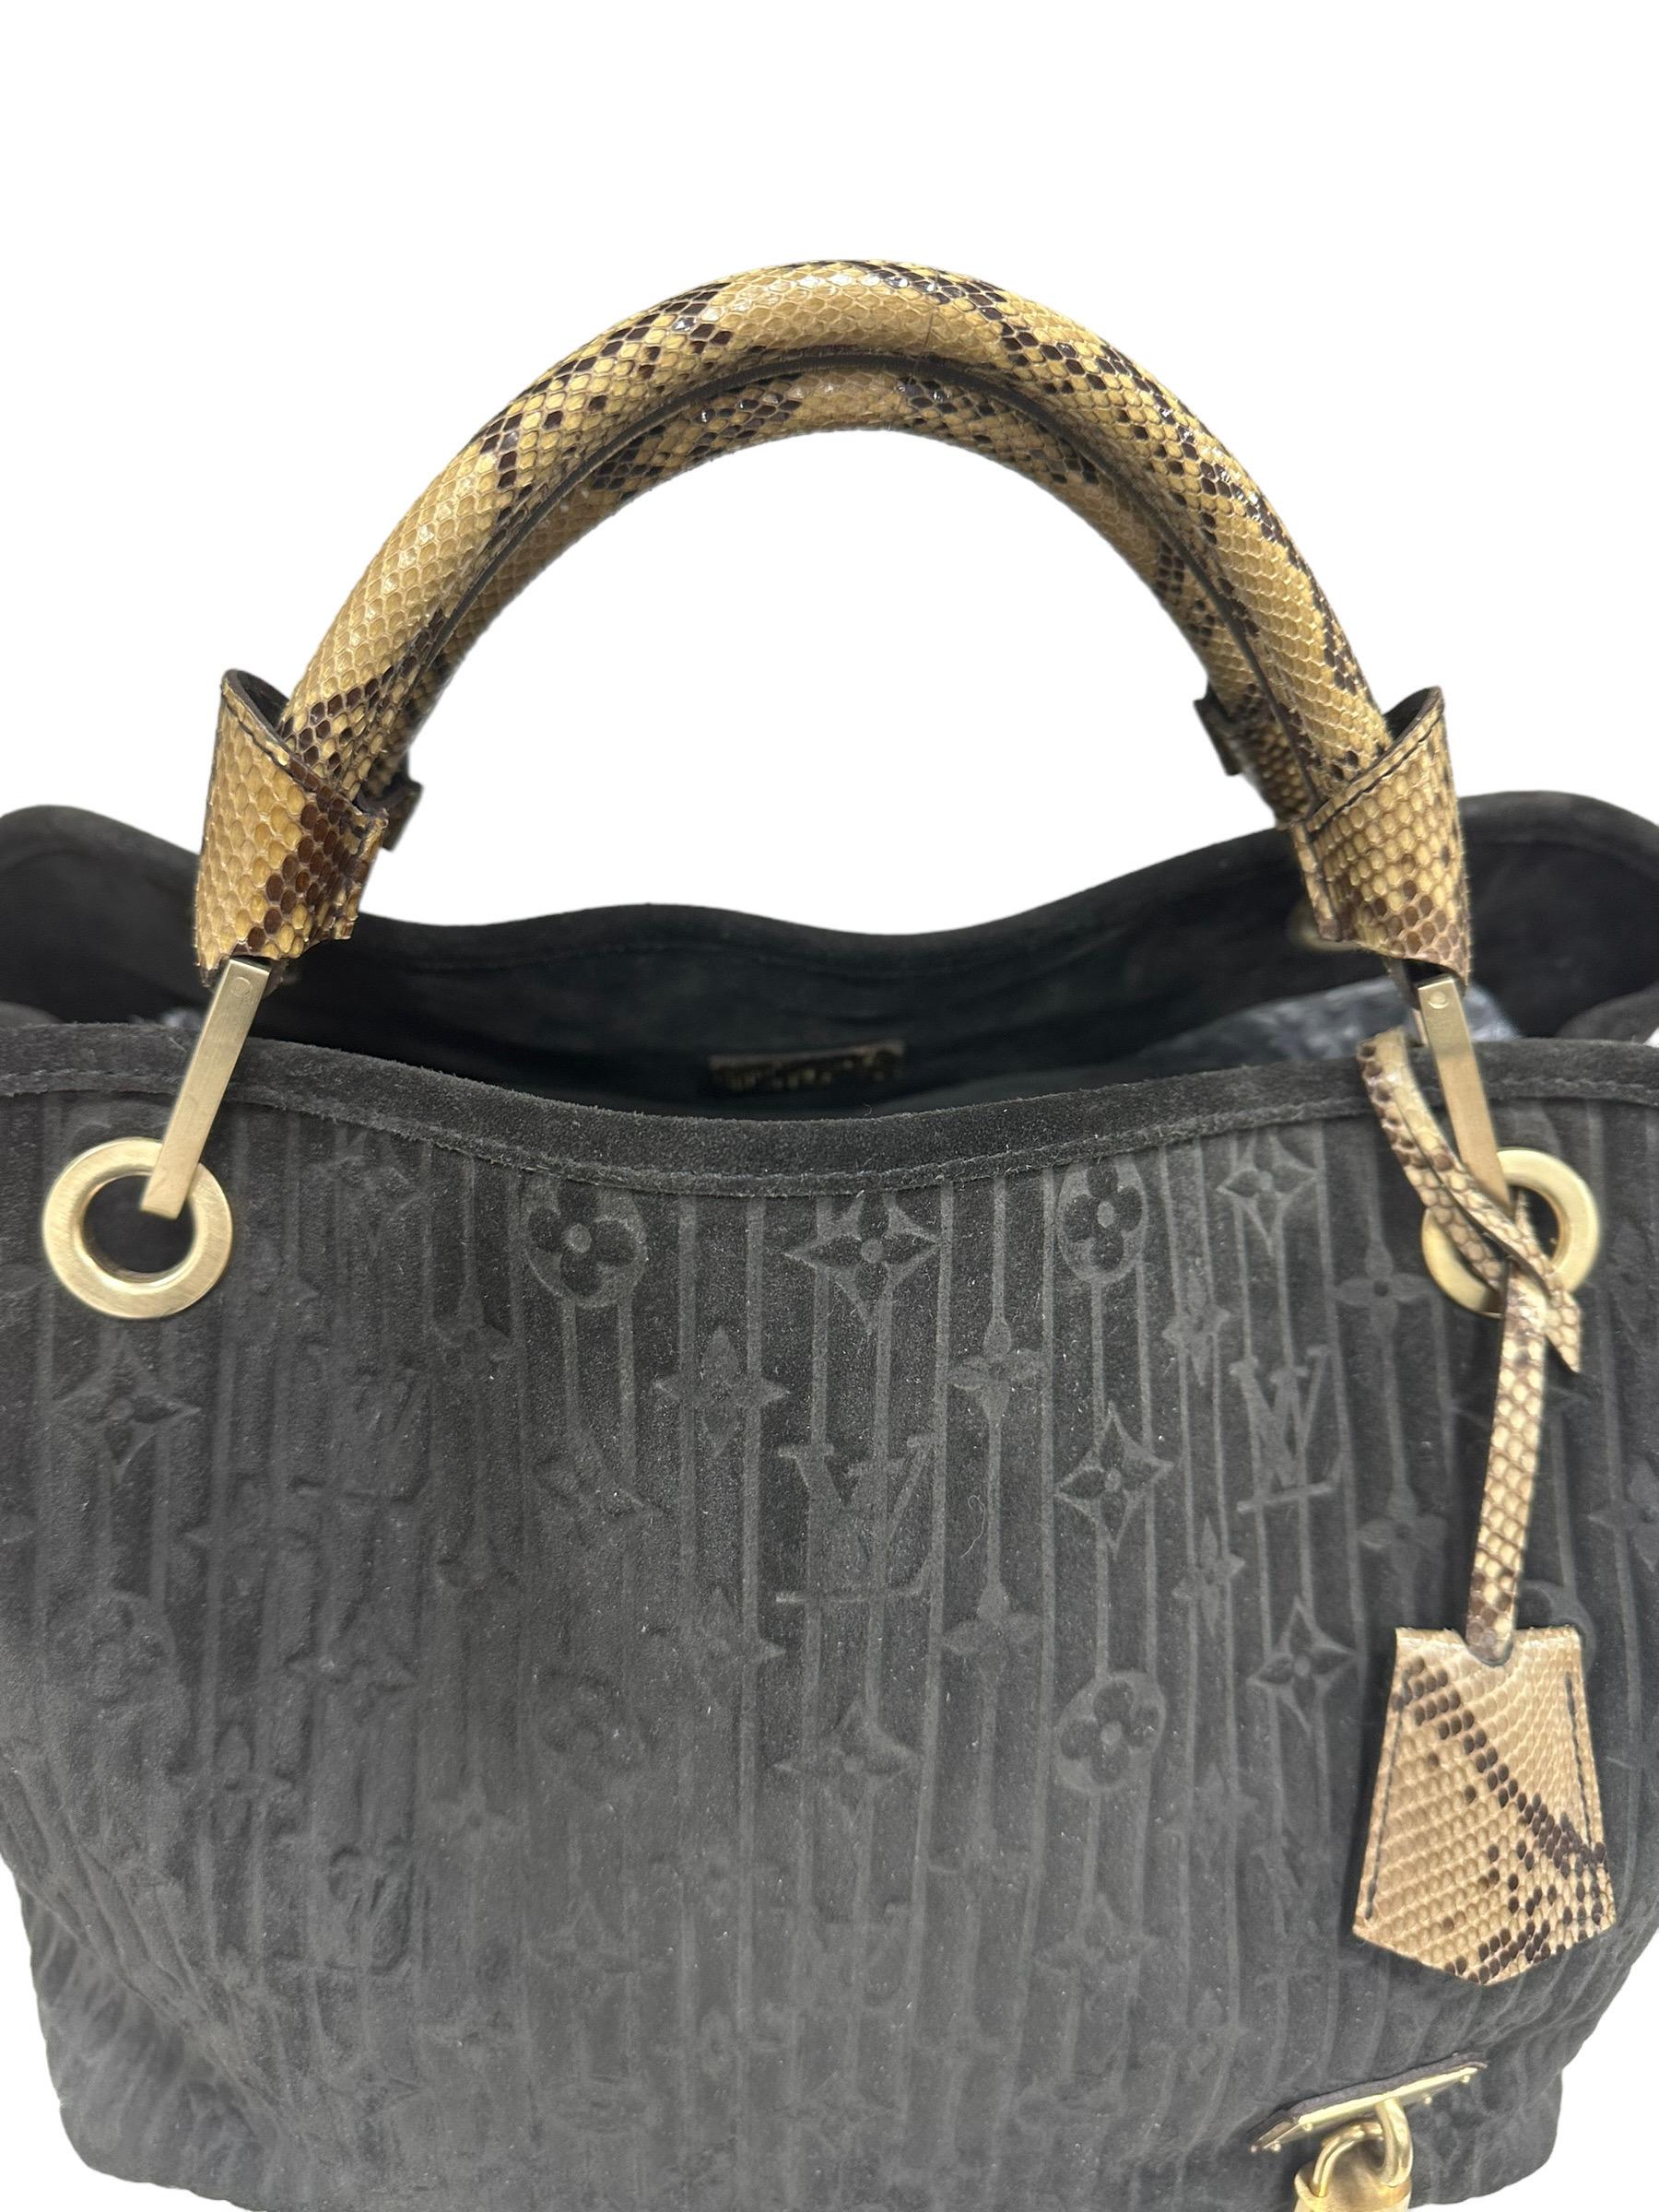 2008 Lousi Vuitton Whisper Black Suede Top Handle Bag Limited Edition In Excellent Condition For Sale In Torre Del Greco, IT